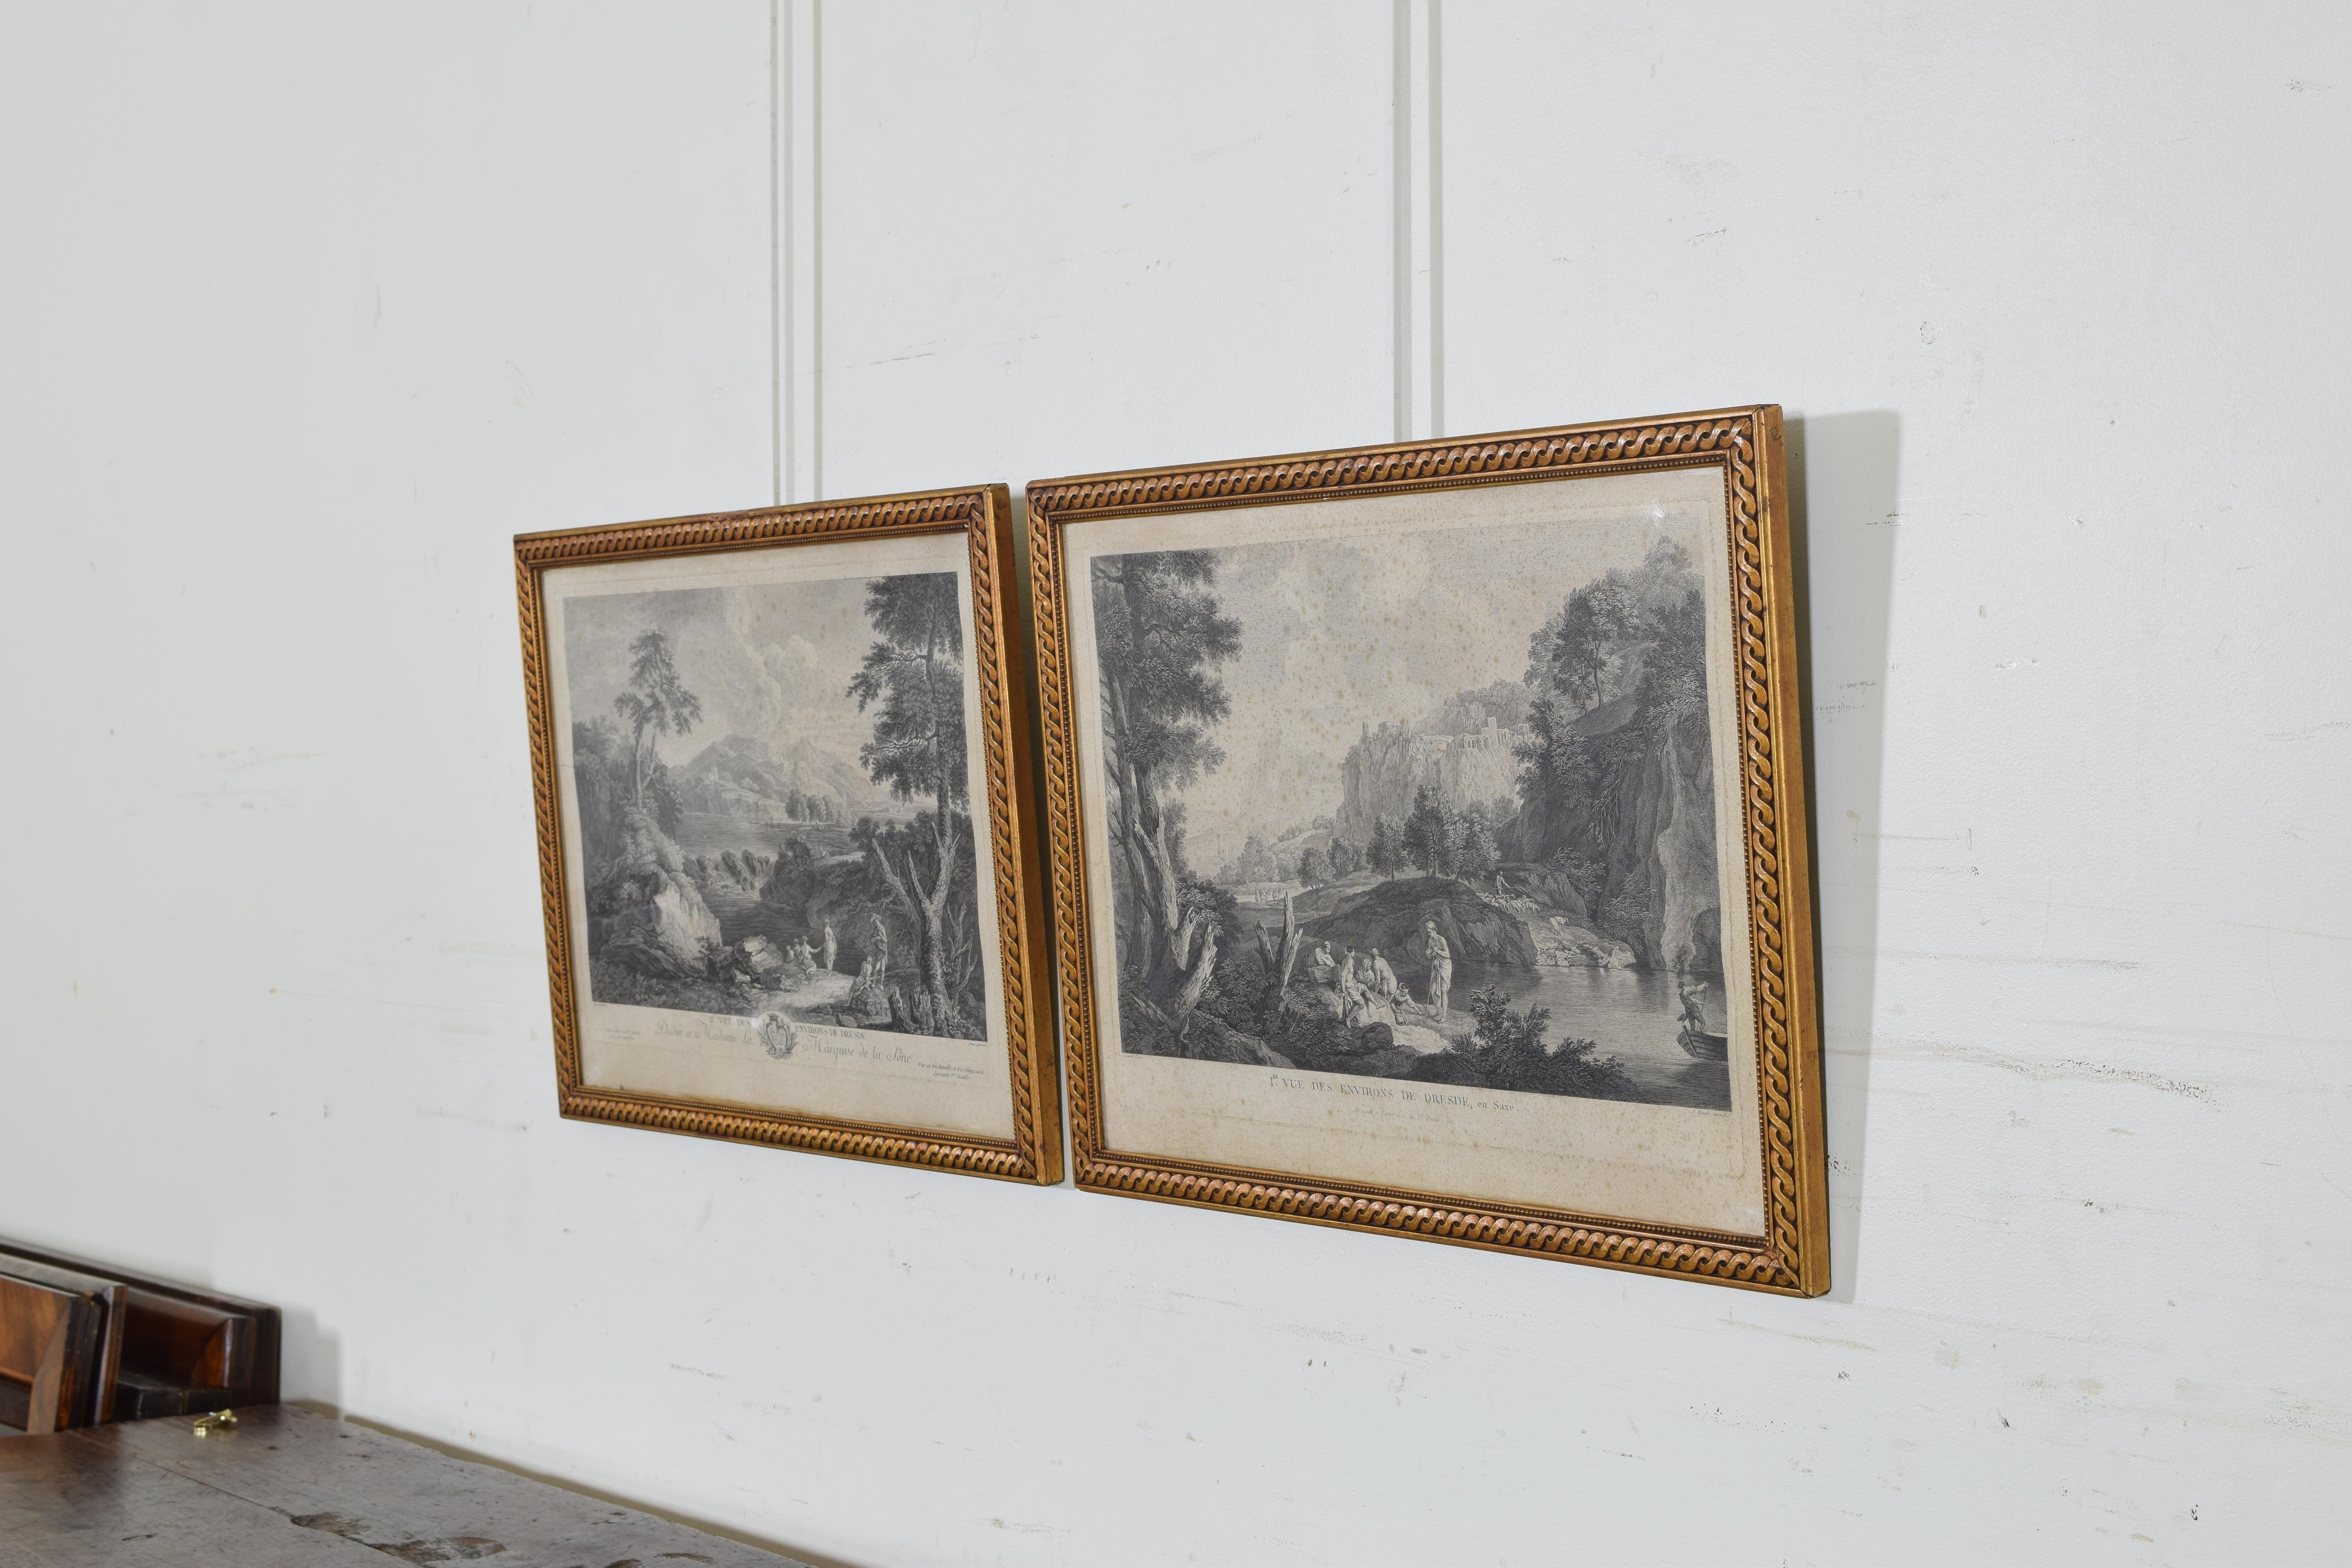 Each depicting bucolic scenes and enclosed in molded and gilded gesso frames.